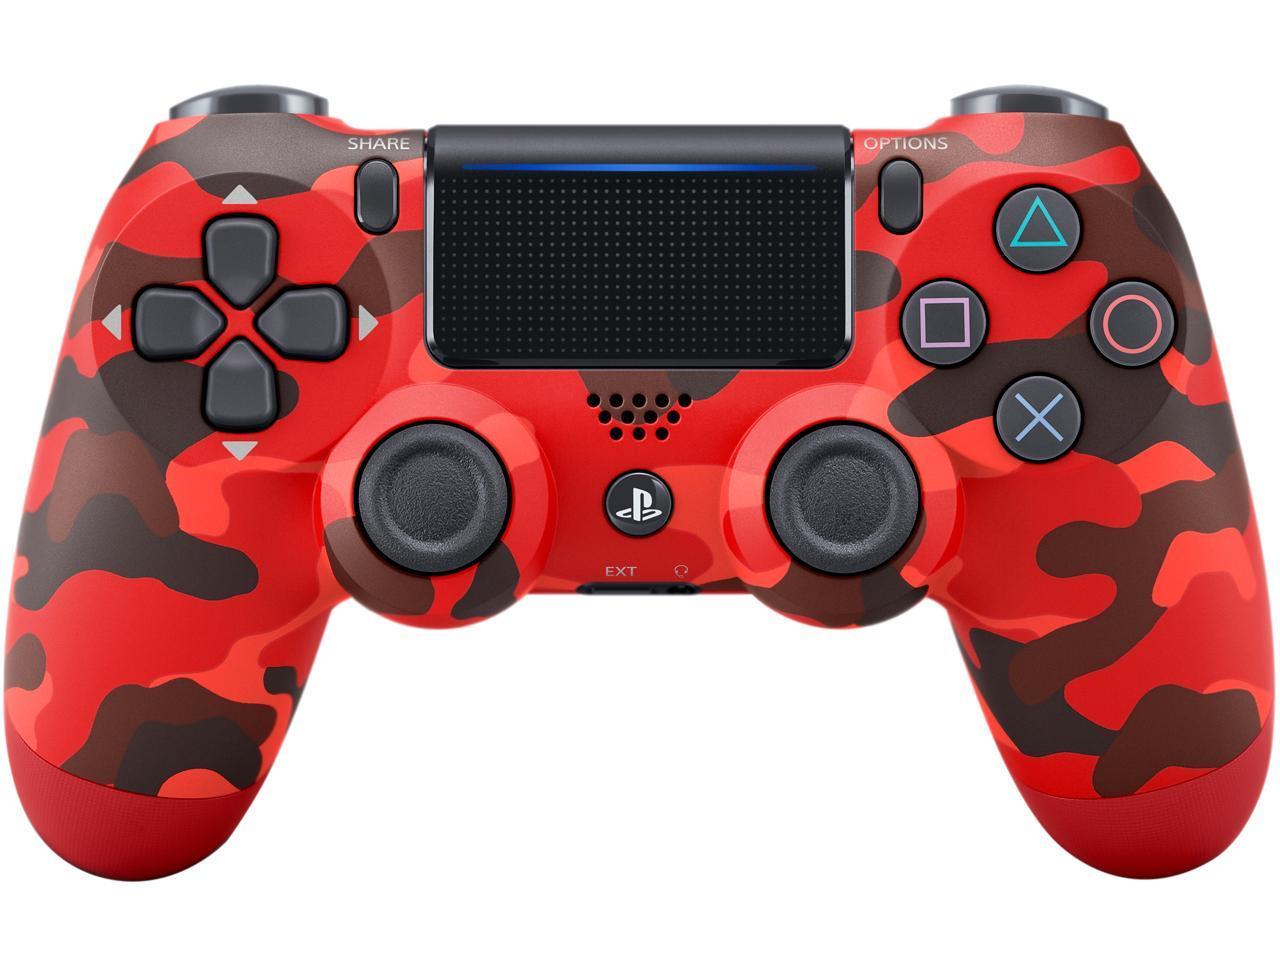 OEM DualShock 4 Wireless Controller for Sony PlayStation 4 - Red Camouflage (CUH-ZCT2)